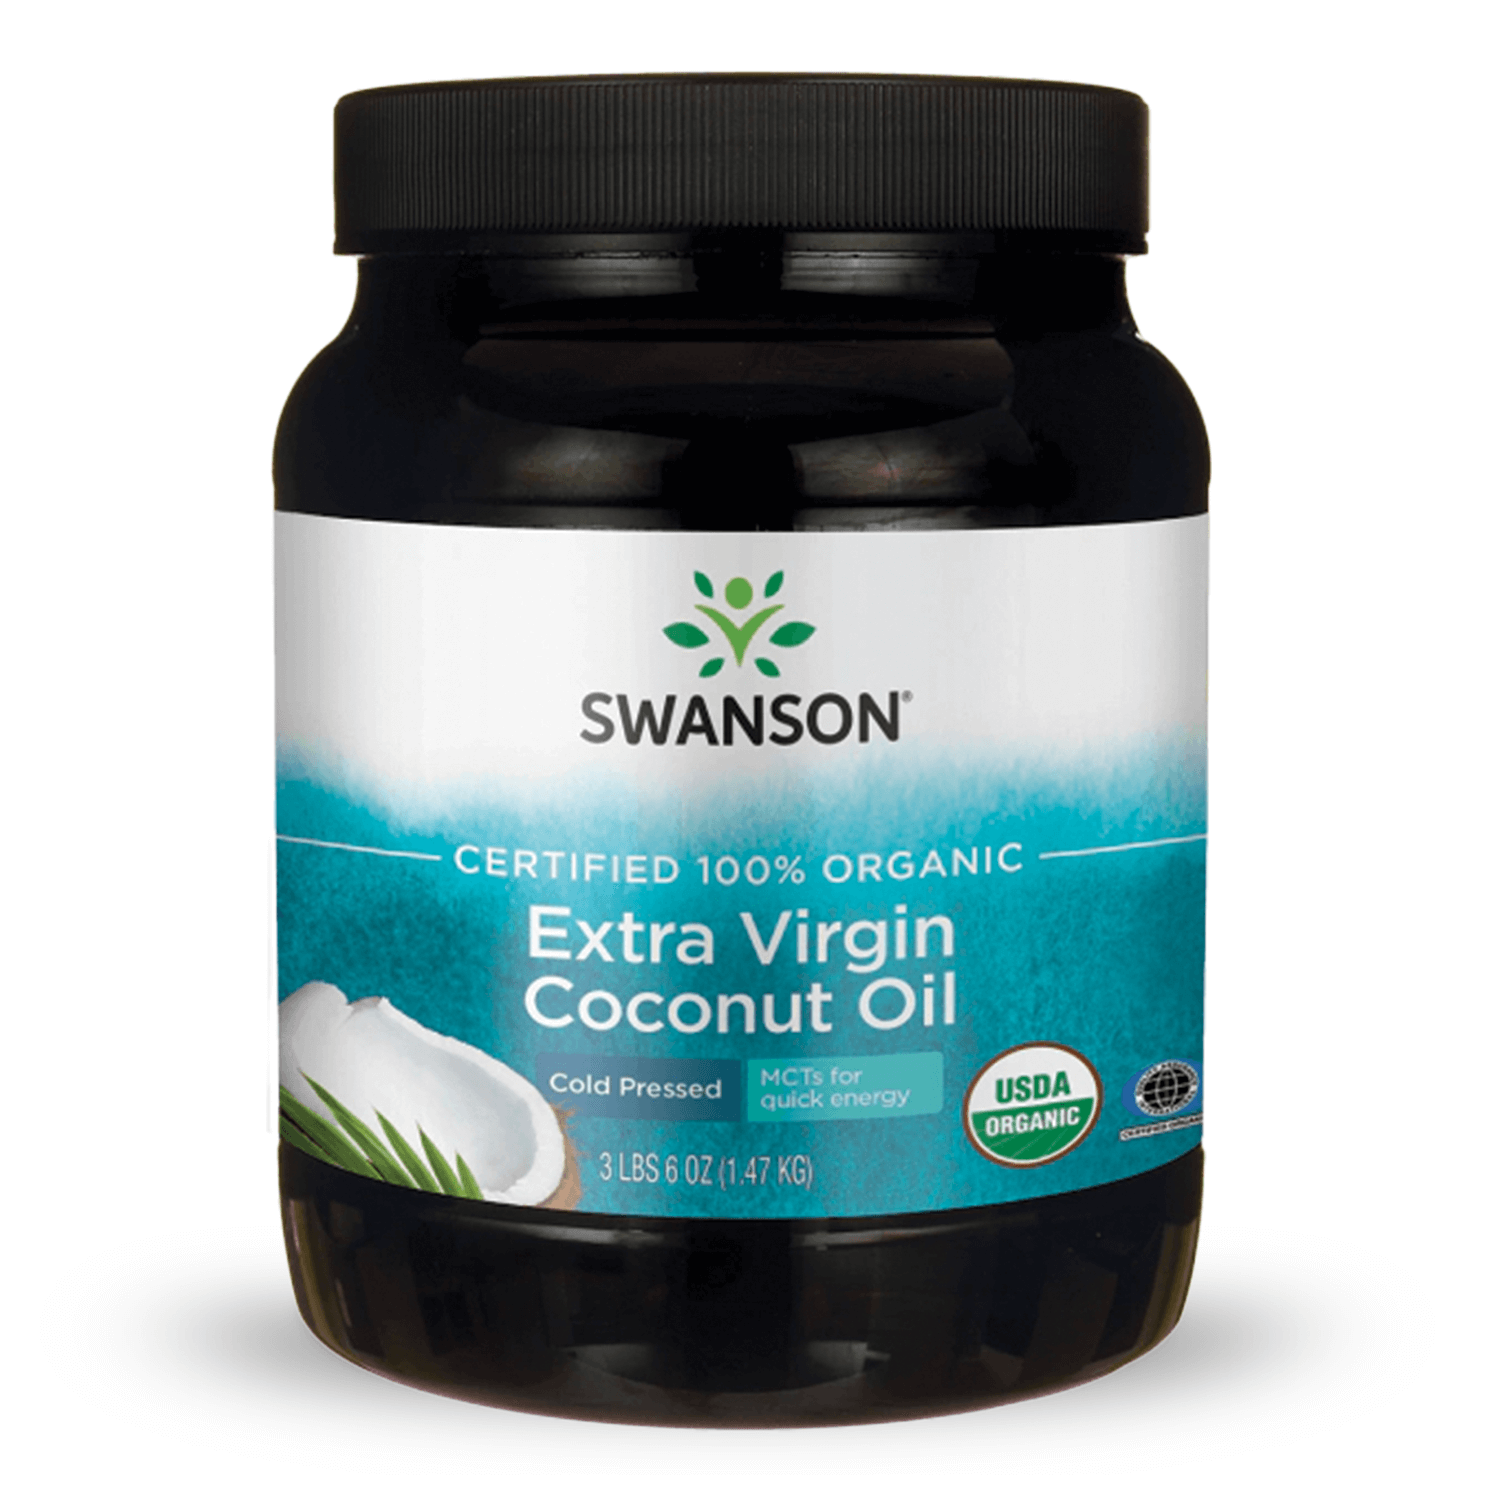 Swanson Organic Certified 100% Extra Virgin Coconut Oil - Cold Pressed | 3 lb 6 oz Solid Oil